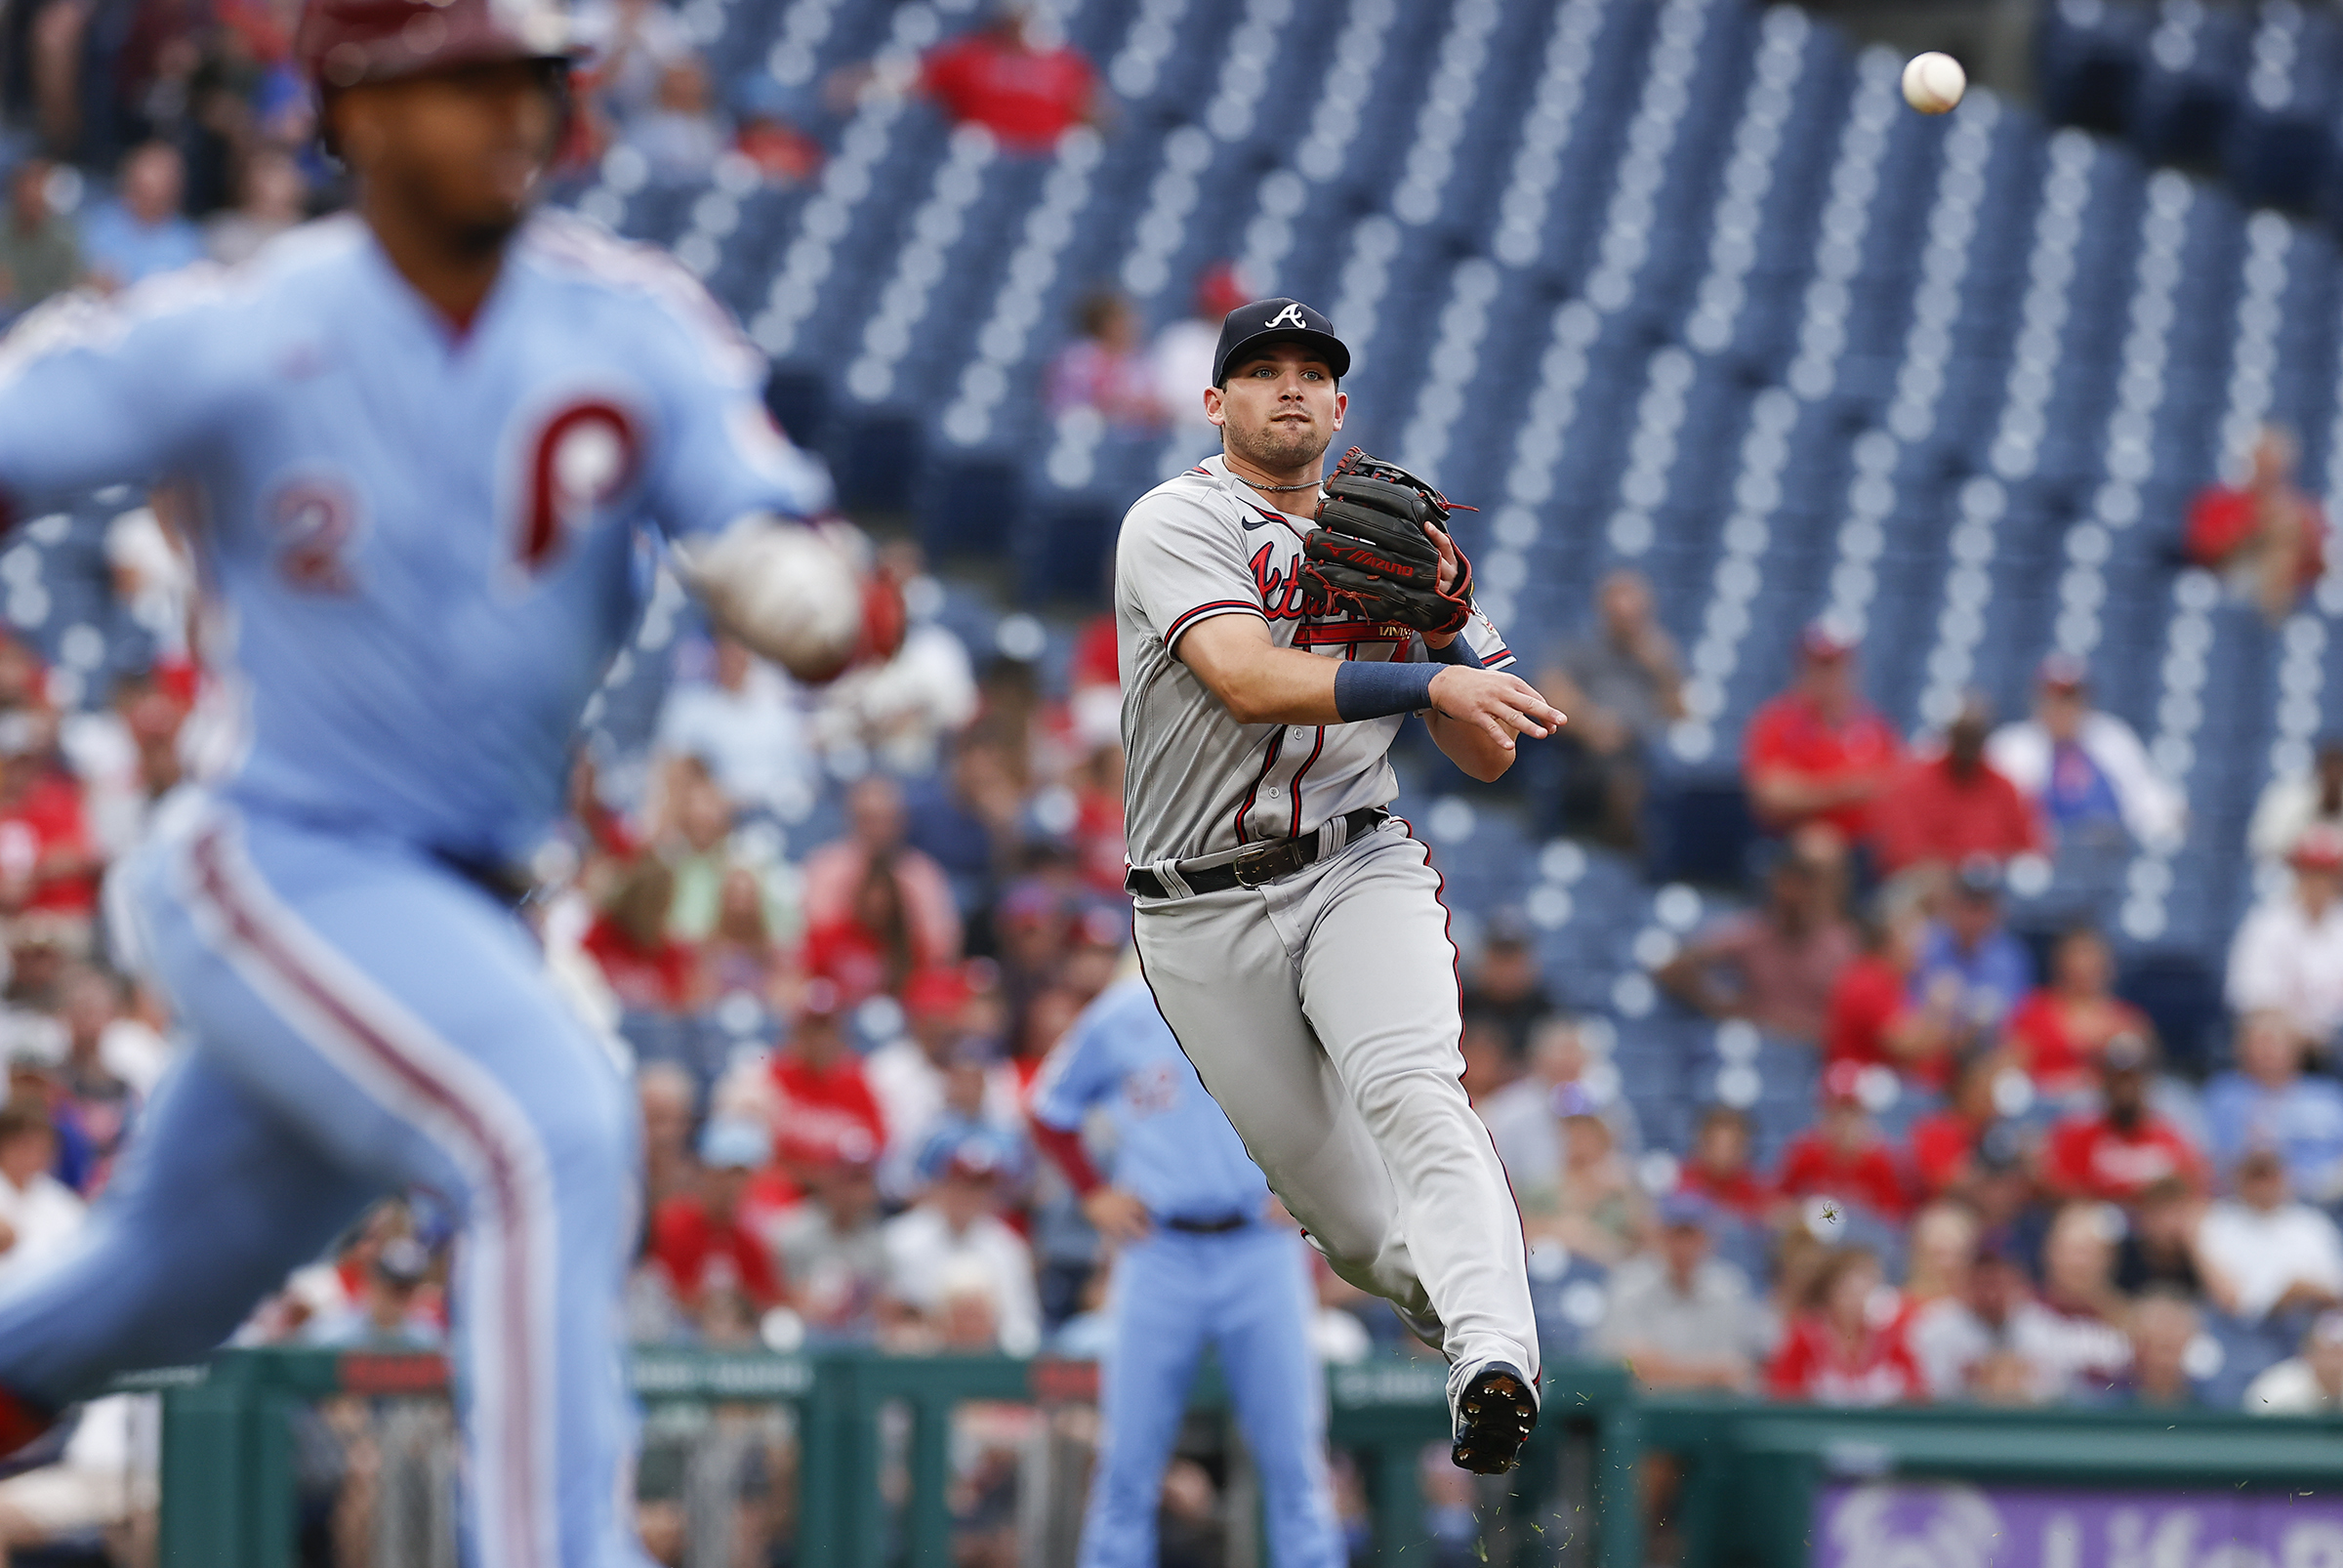 Photos from the Phillies' loss to the Braves